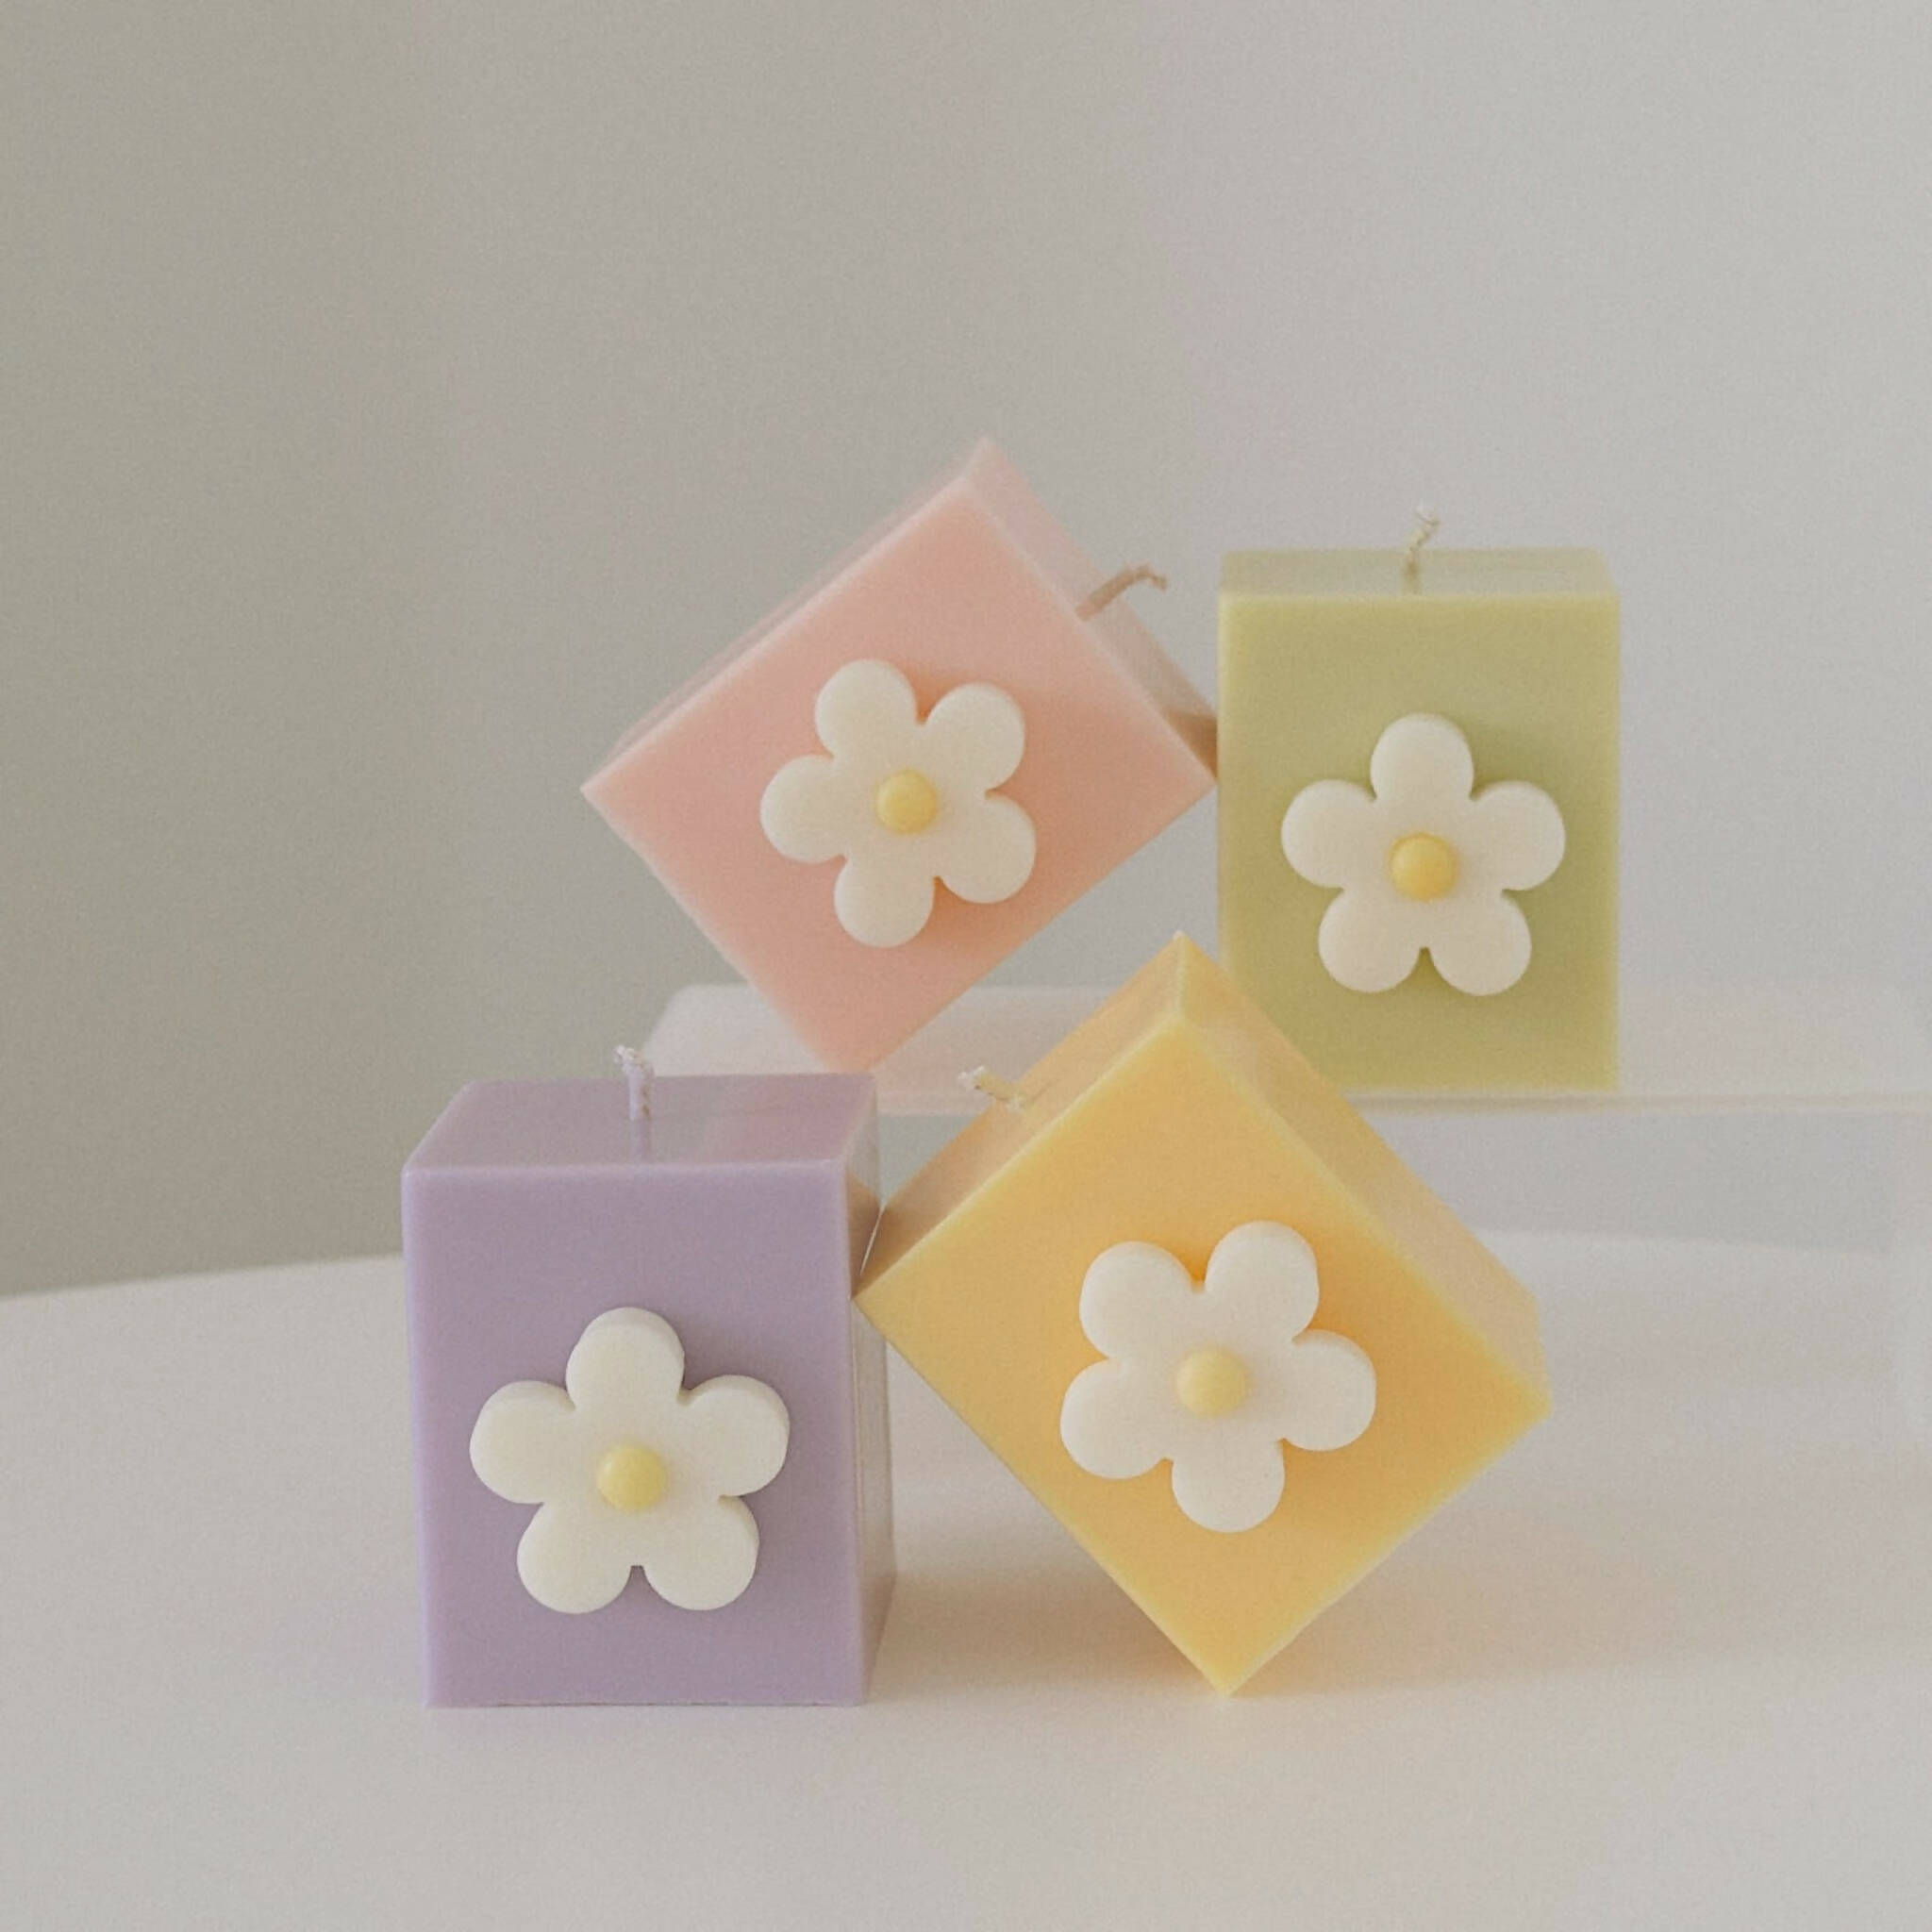 Daisy Flower Candle